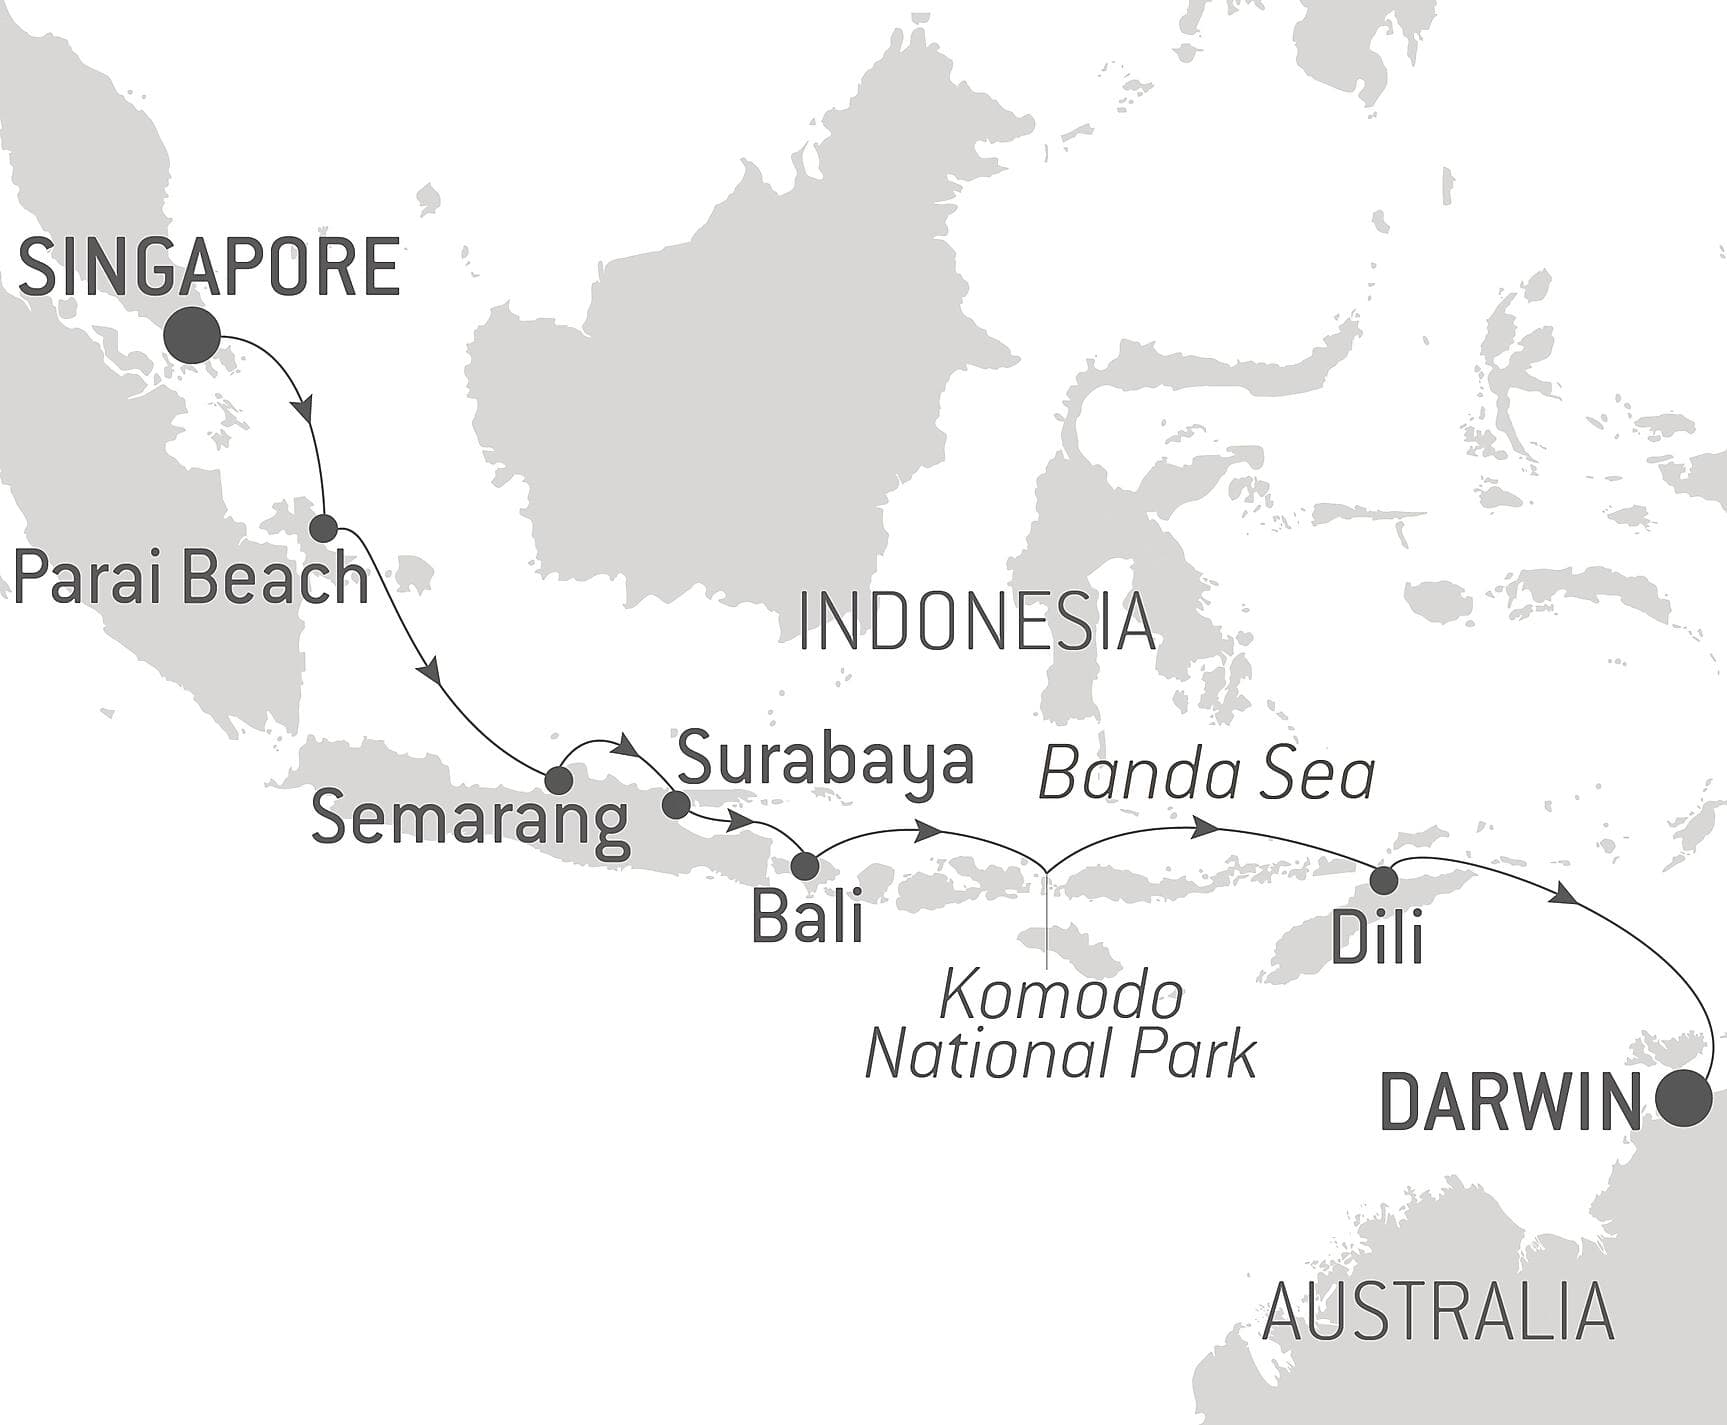 Indonesia&apos;s sacred temples and natural sanctuaries